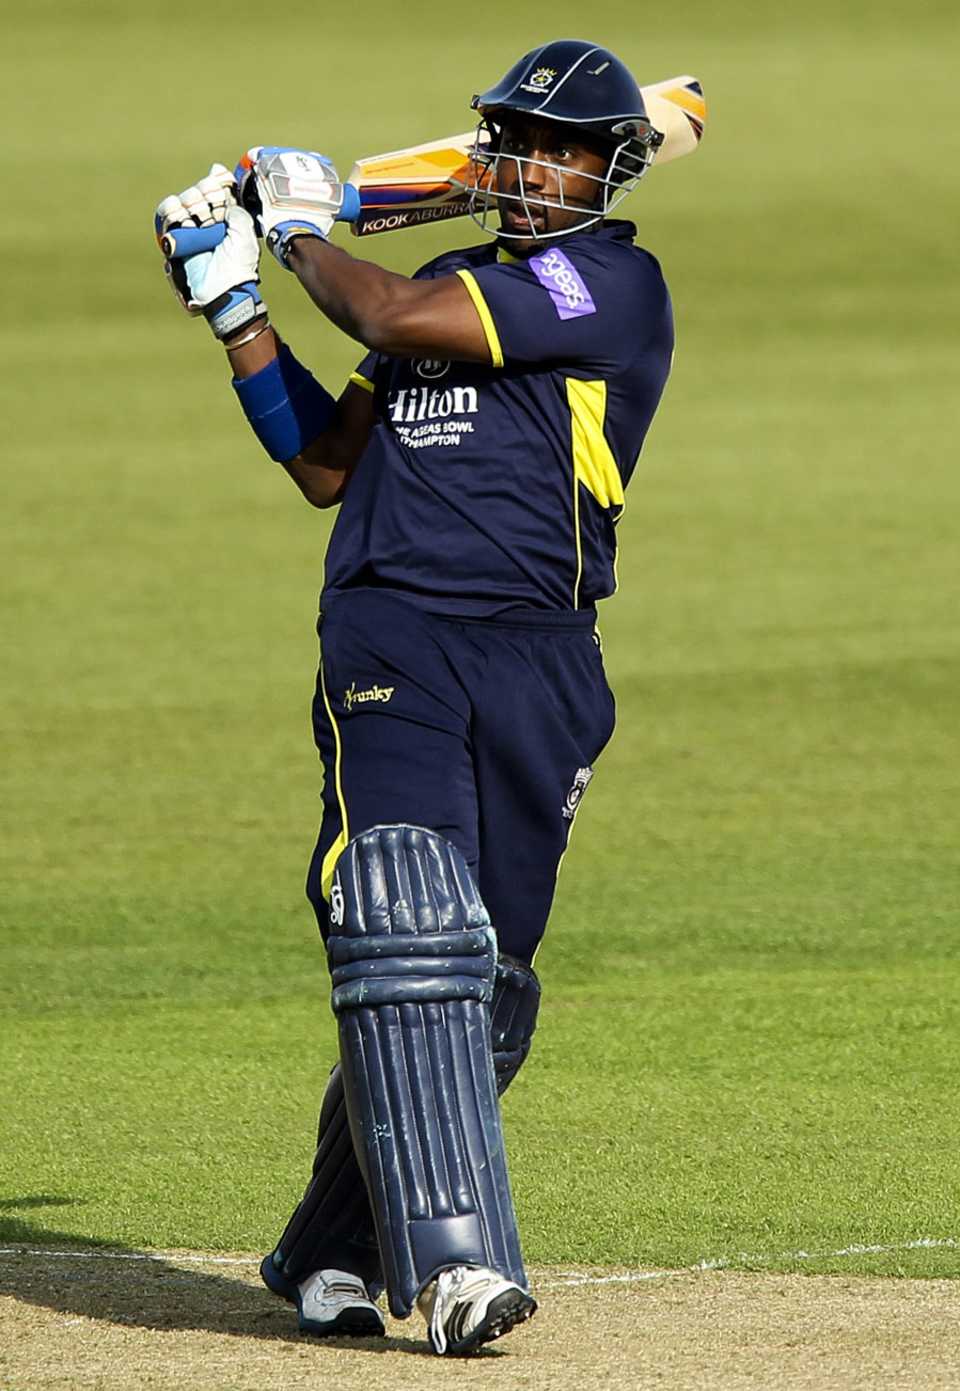 Michael Carberry fell four runs short of a century